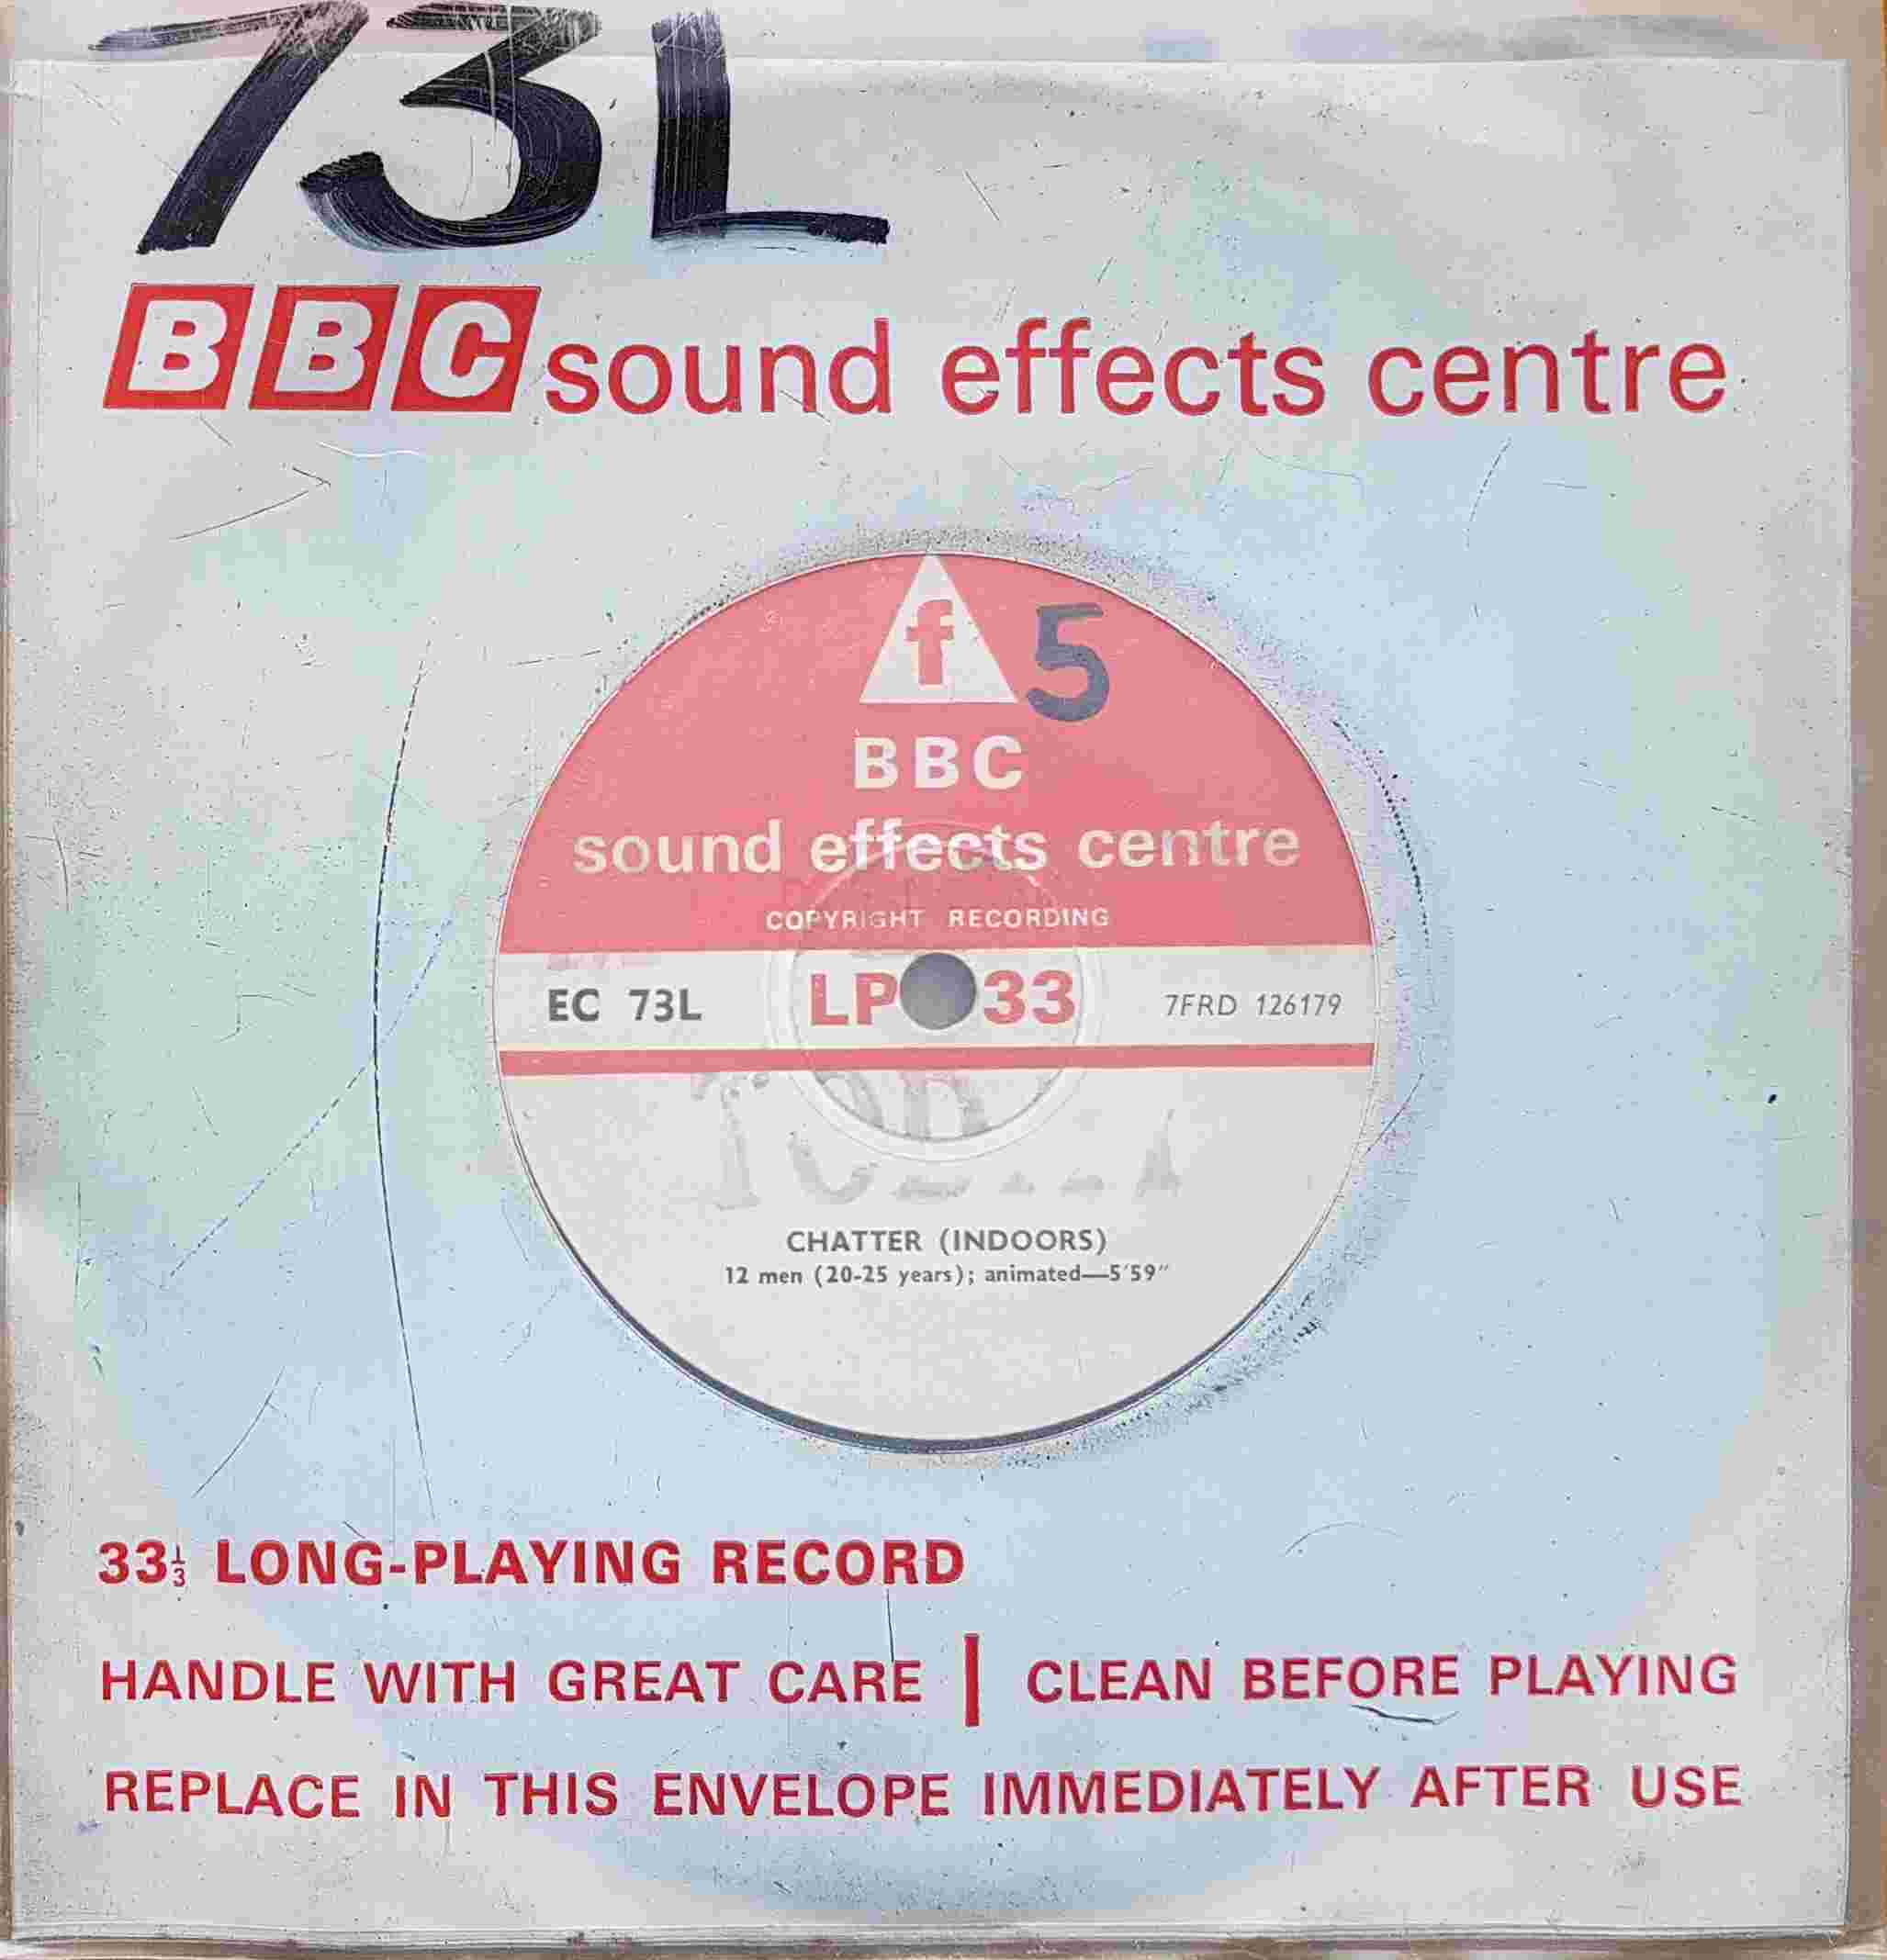 Picture of EC 73L Chatter - Indoors single by artist Not registered from the BBC records and Tapes library